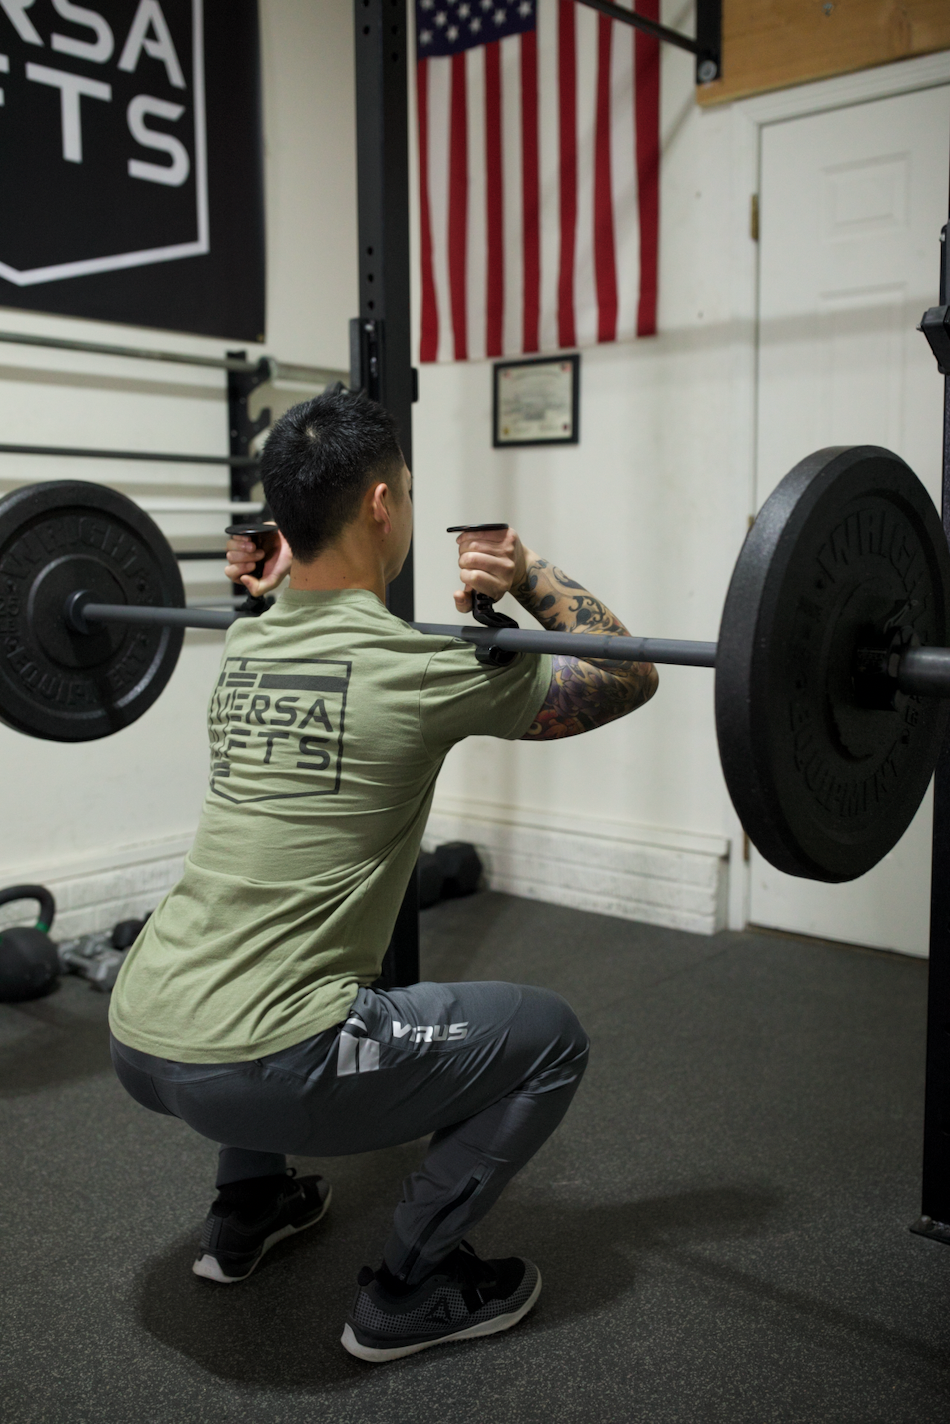 VersaLifts V-Hook barbell hooks for front squats (pair)